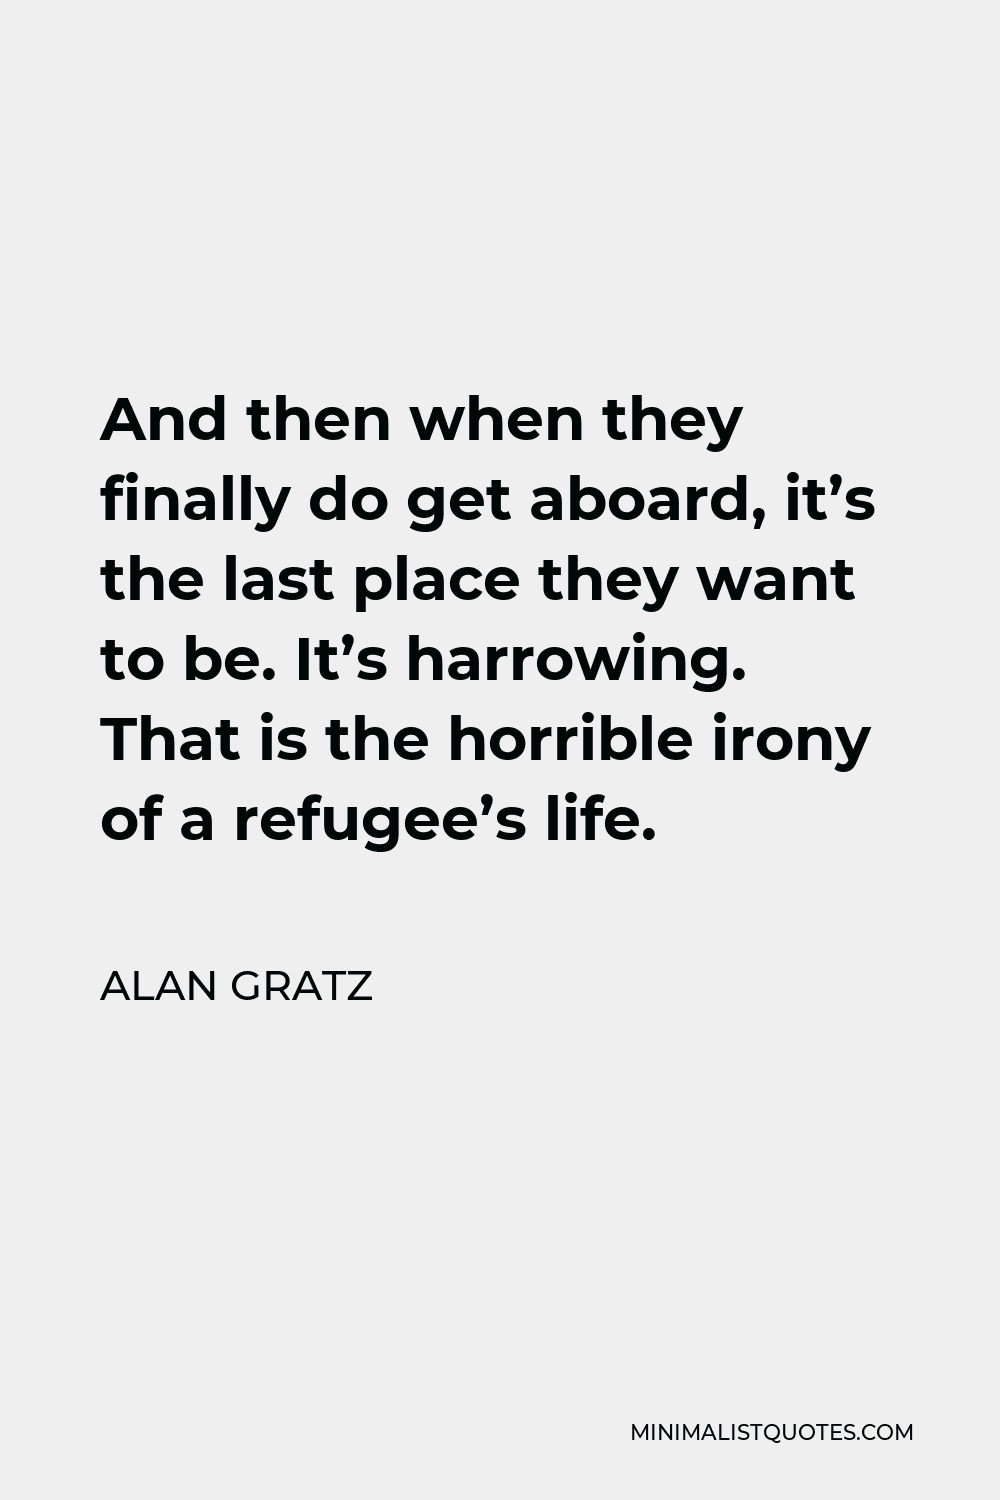 Alan Gratz Quote - And then when they finally do get aboard, it’s the last place they want to be. It’s harrowing. That is the horrible irony of a refugee’s life.